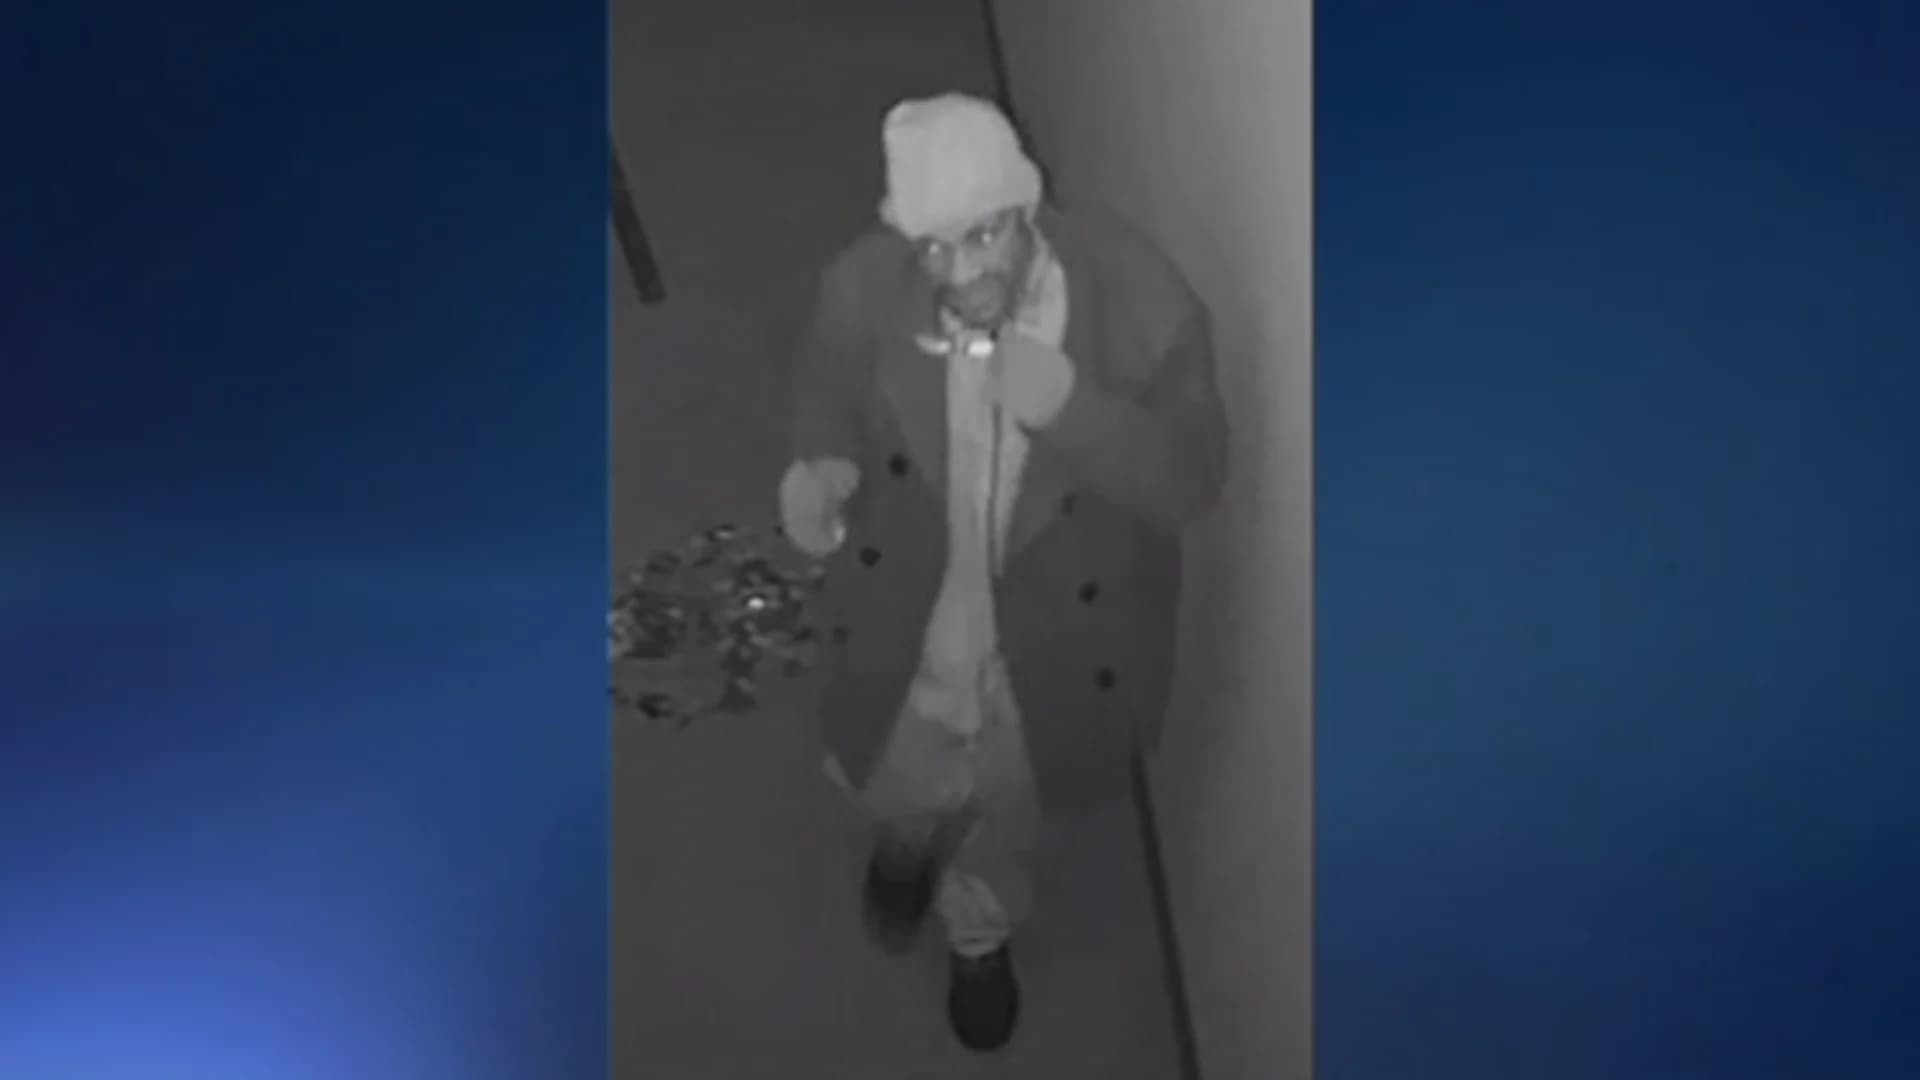 Police: Man broke into synagogue, caused thousands in damage